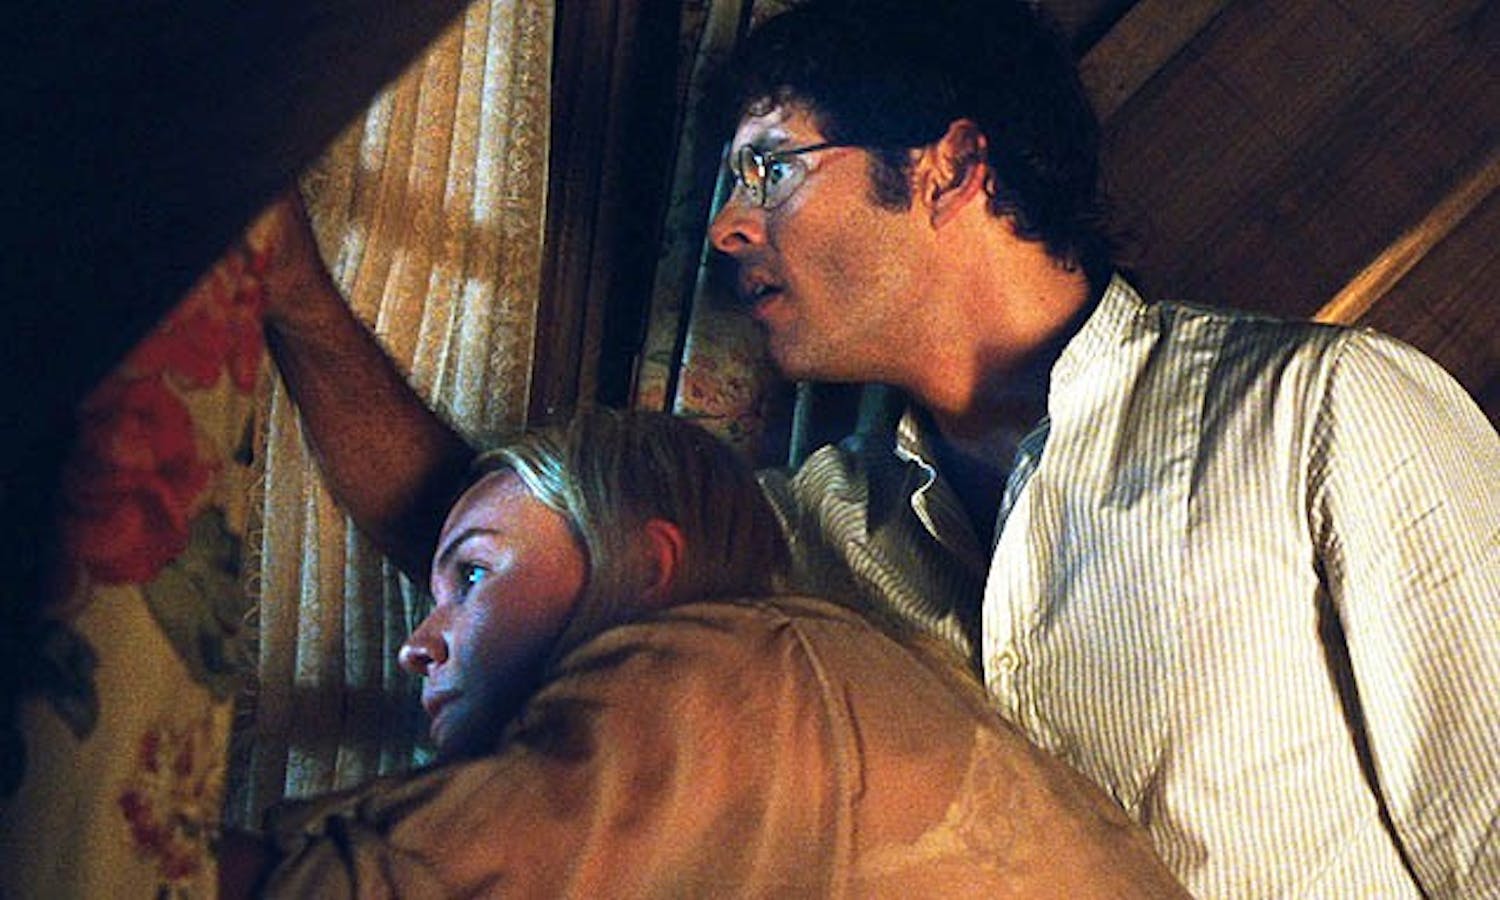 Kate Bosworth as "Amy Sumner" and James Marsden as "David Sumner" in Screen Gems' STRAW DOGS.